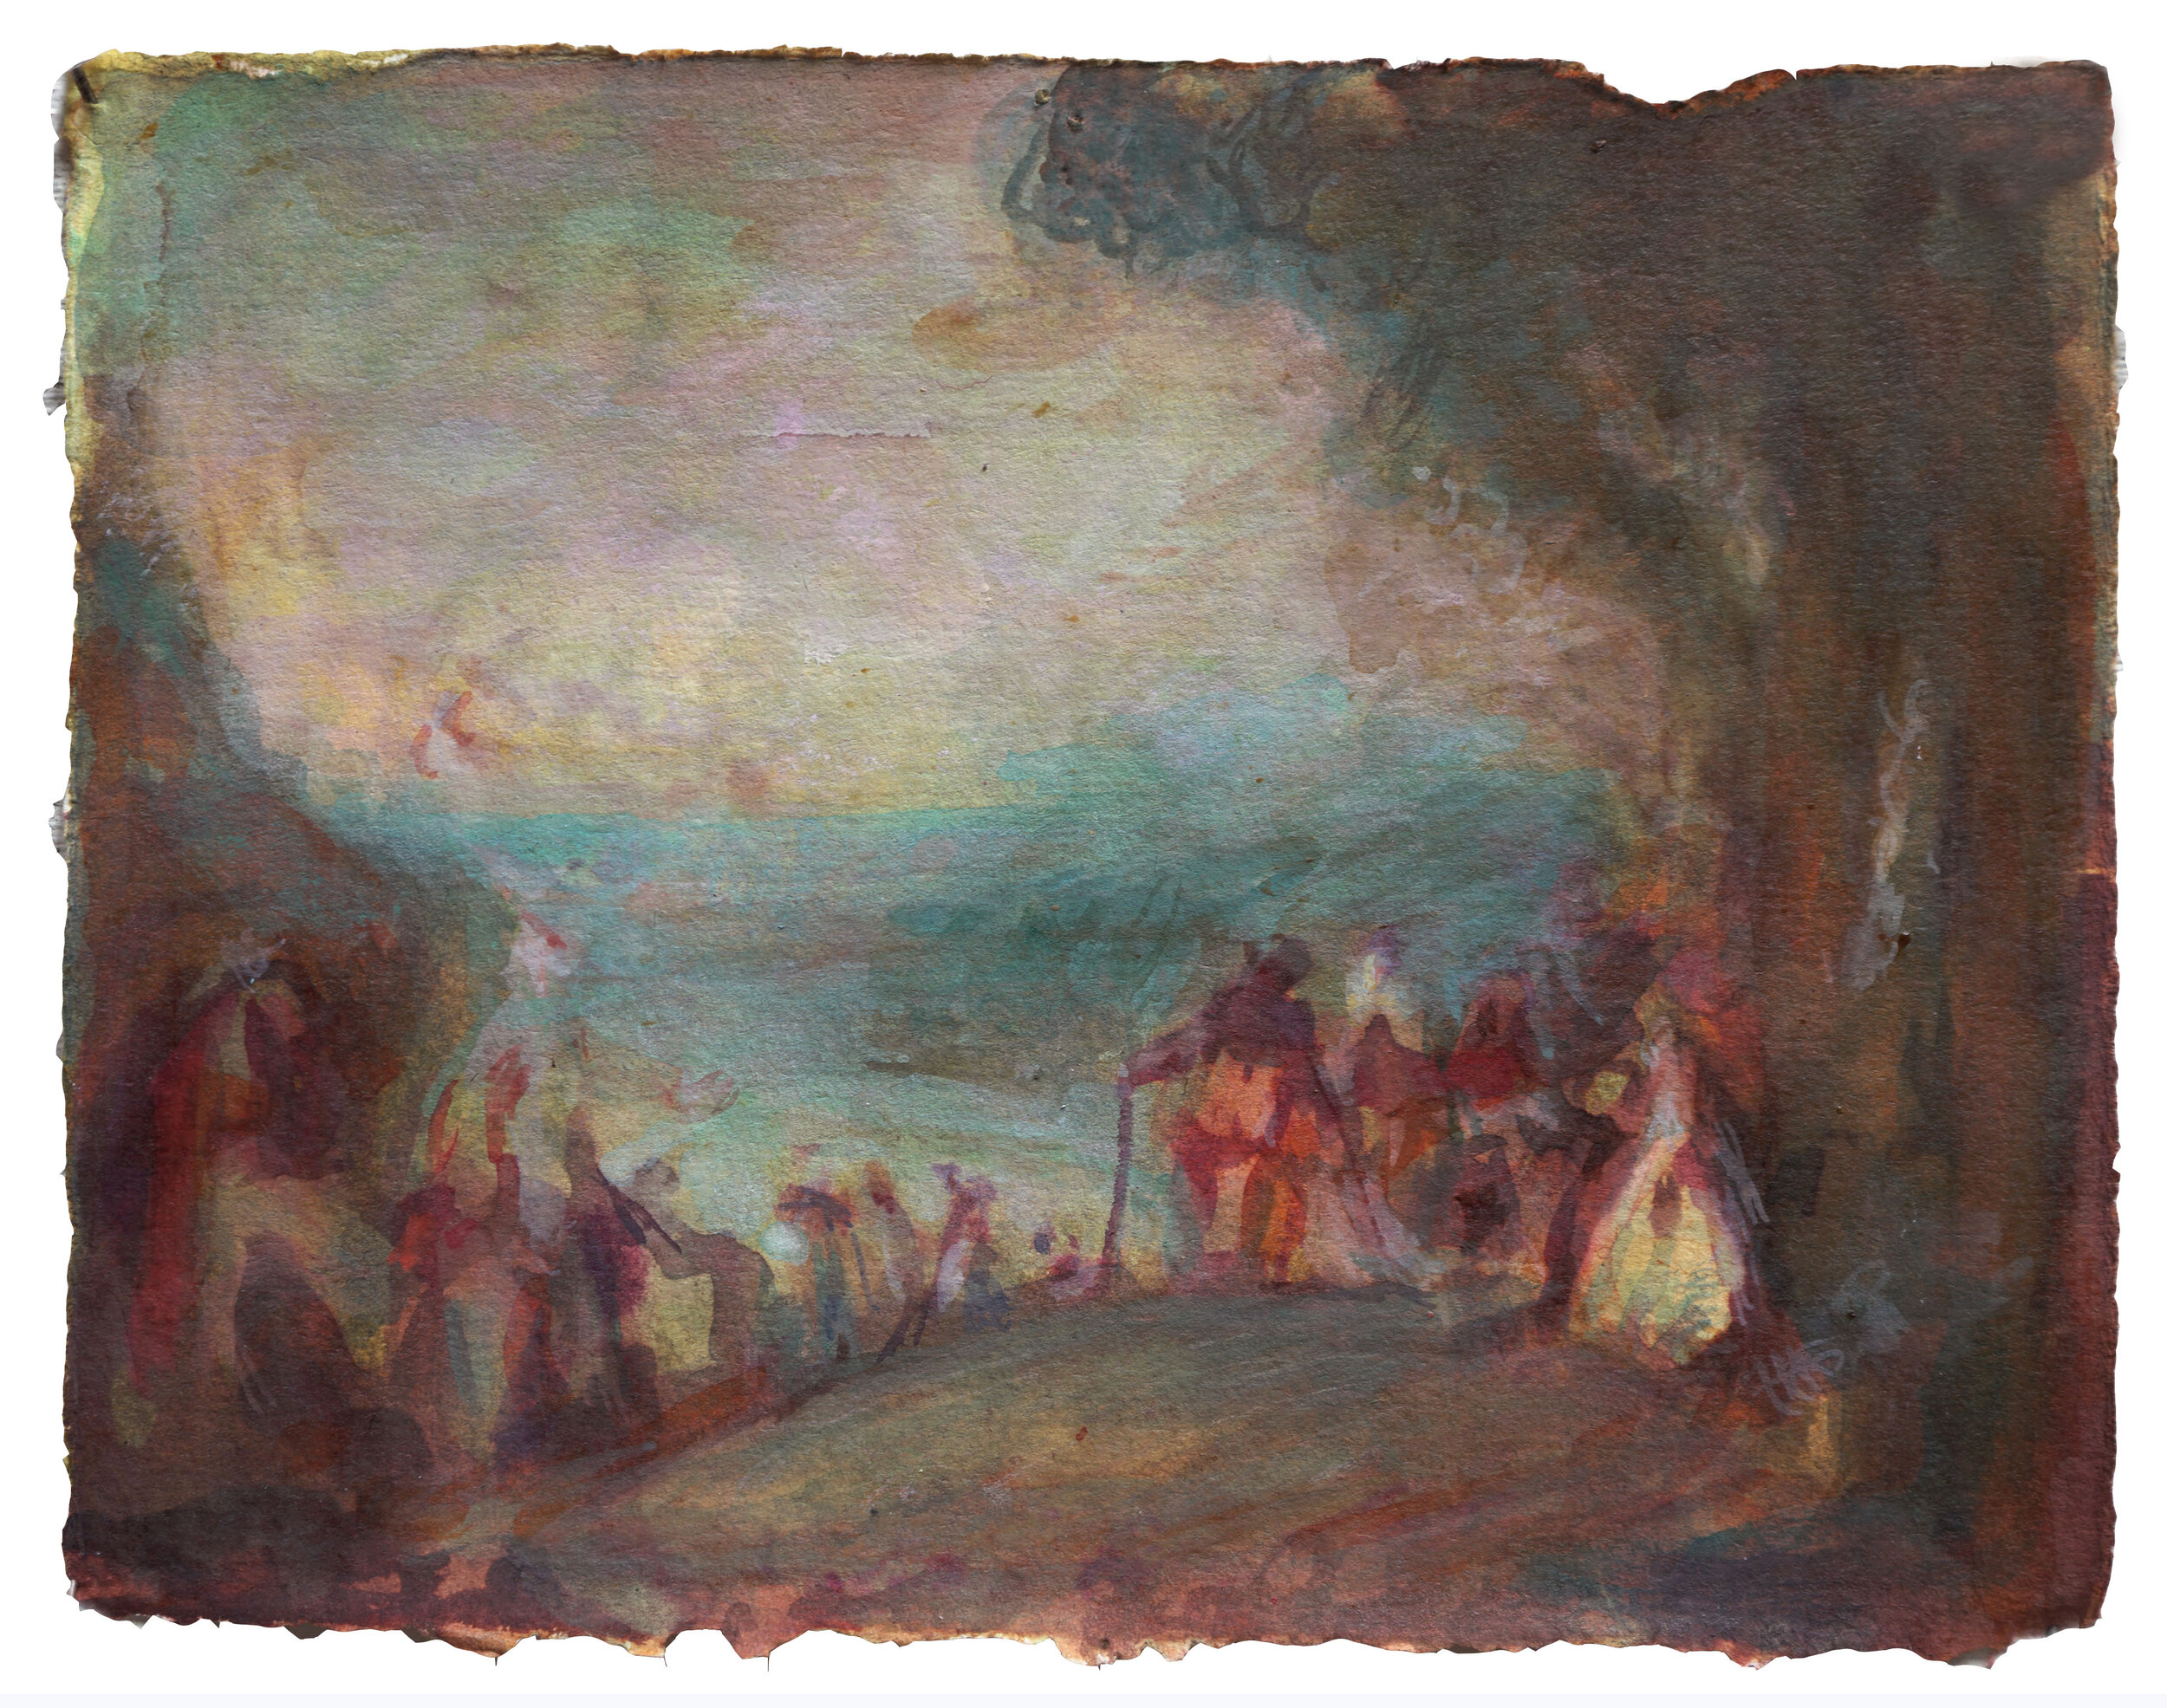 After Watteau, Visit to the Island of Cytheria, 5.75" x 7.25", Gouache and Ink on Paper, 2020